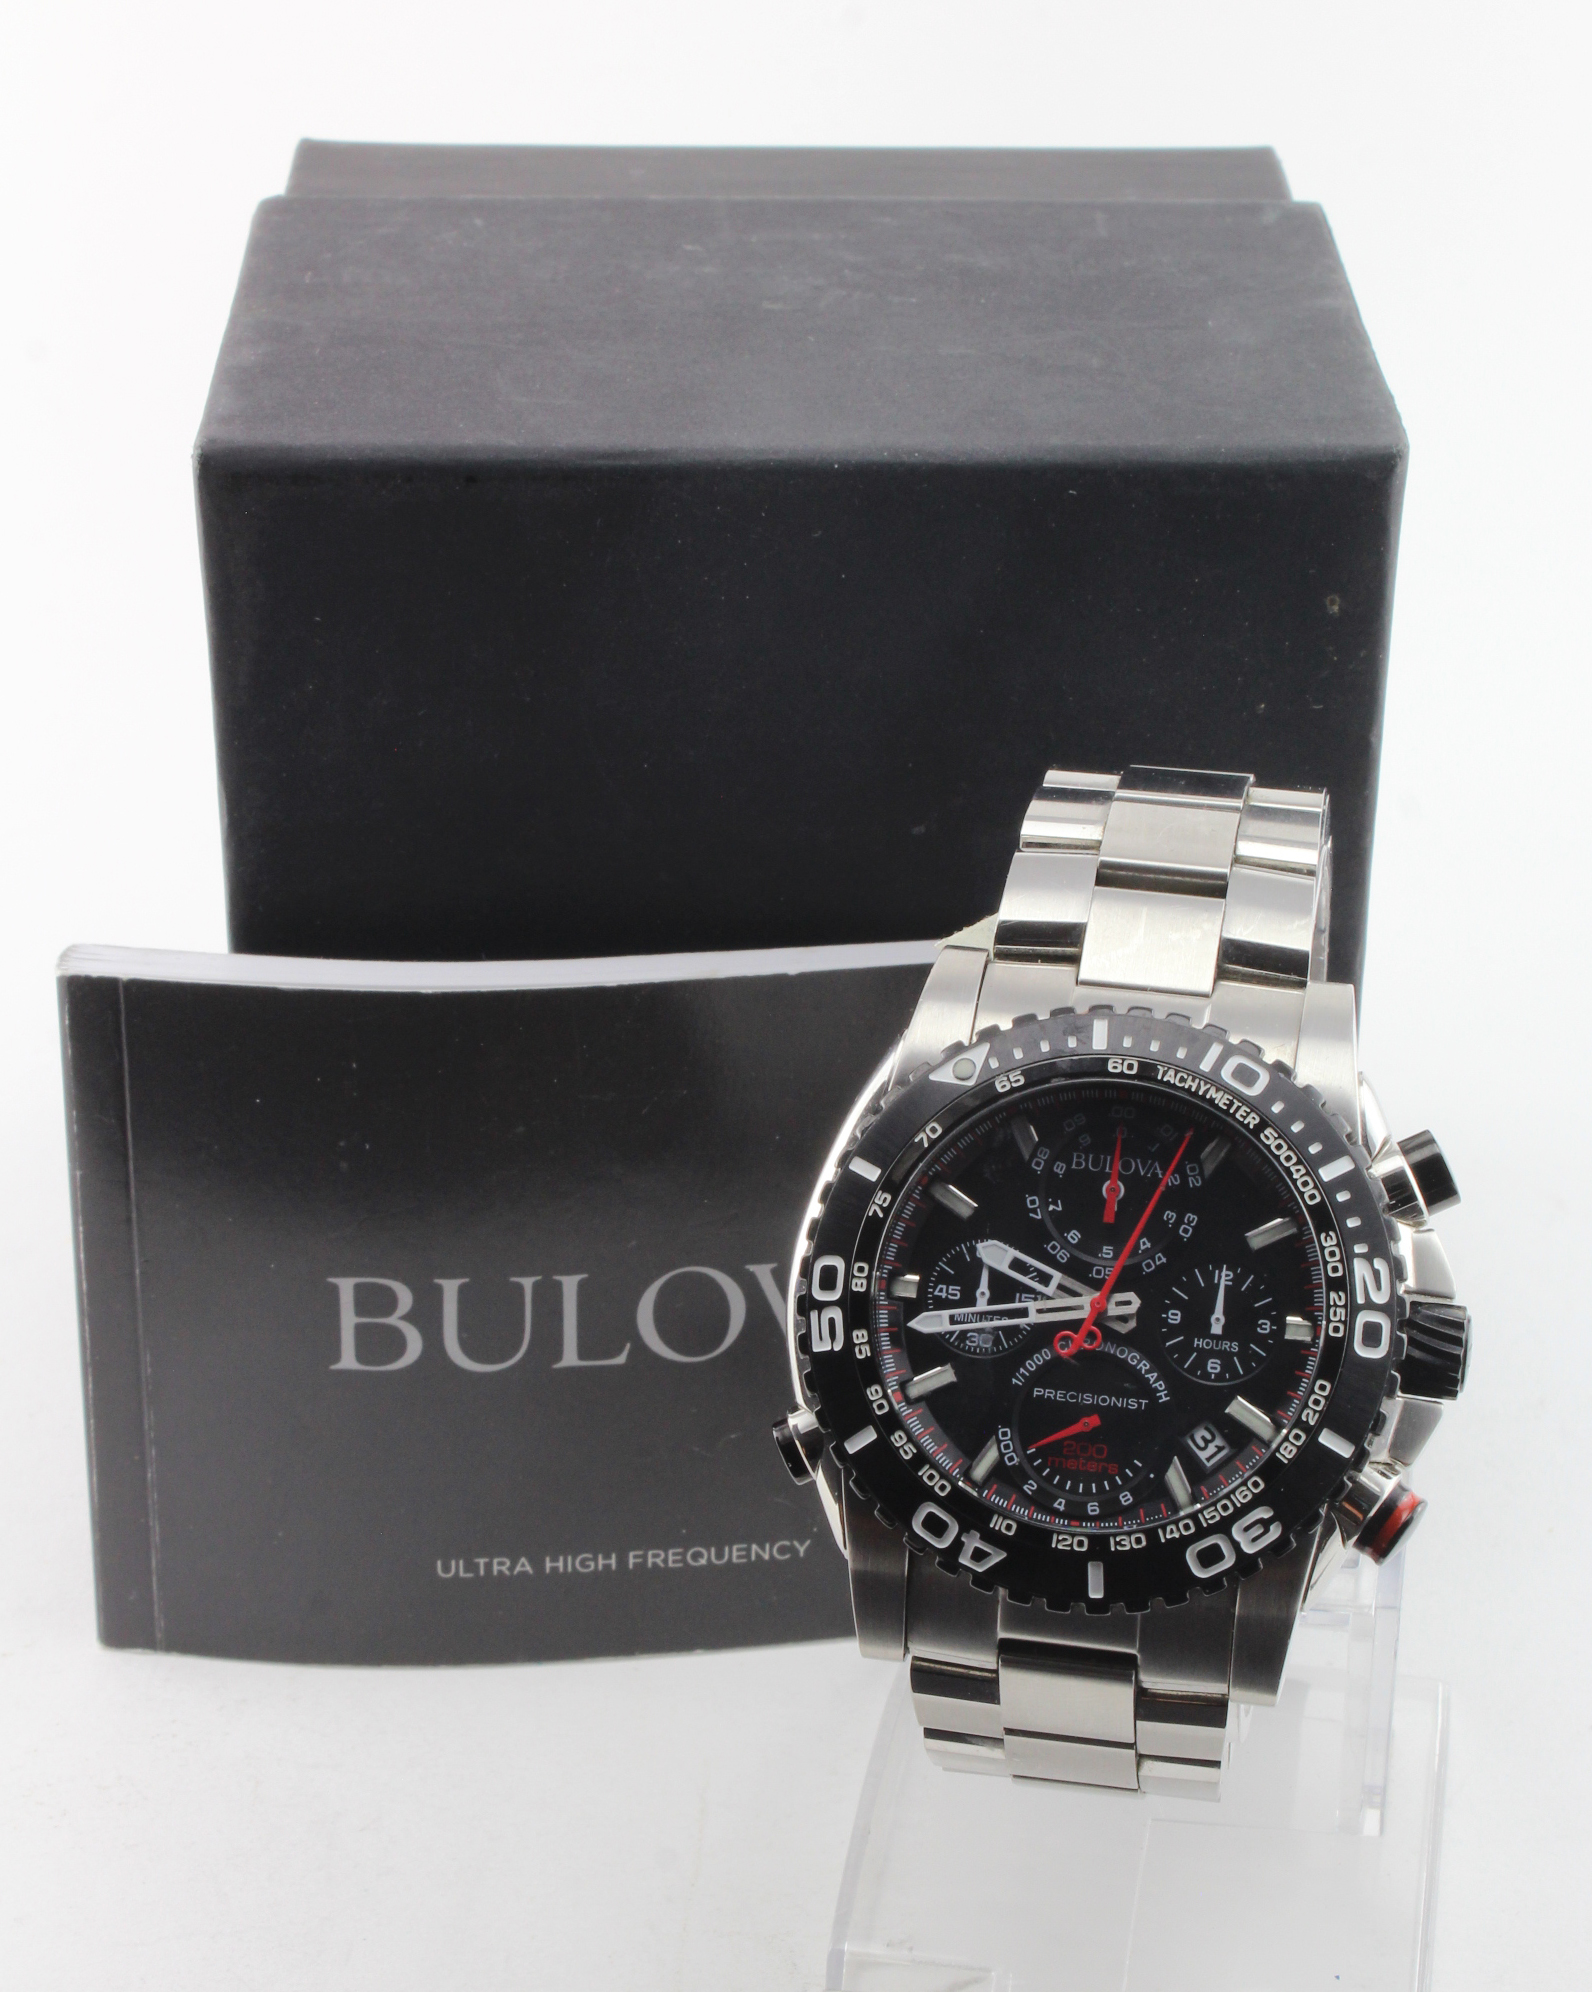 Gents Bulova precisionist 1/1000 chronograph wristwatch. The black dial with four subsidiary dials